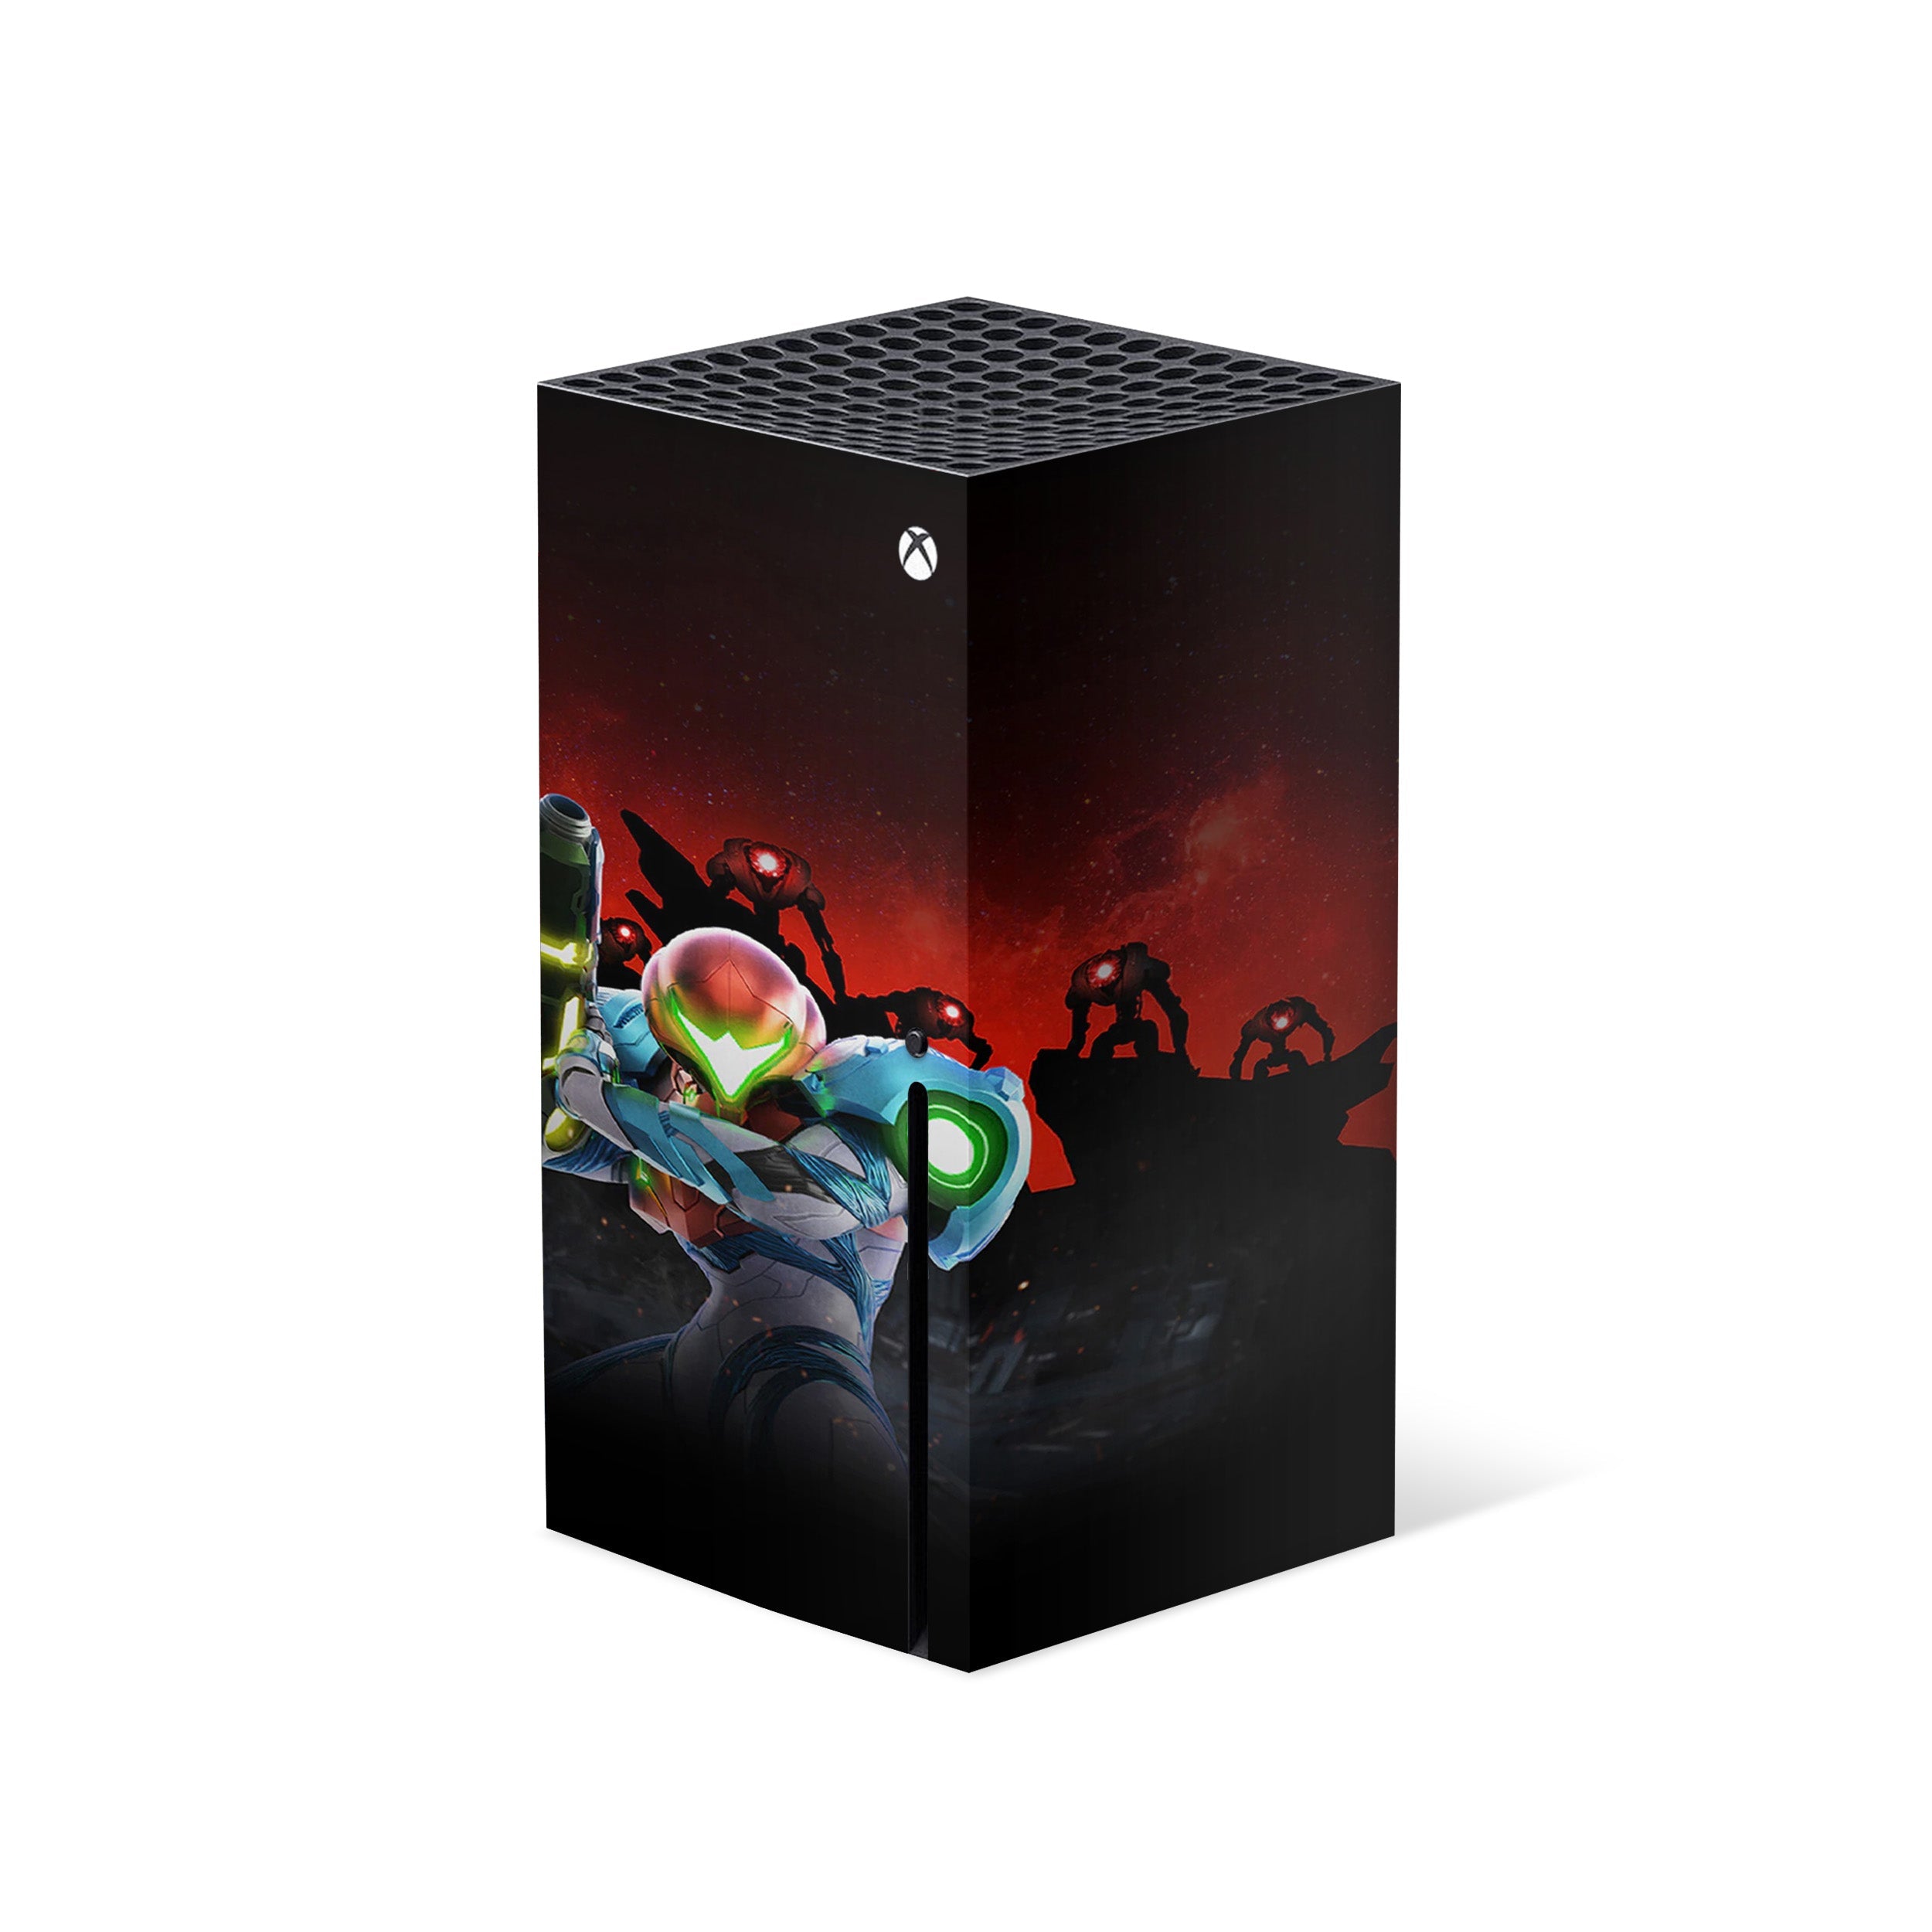 A video game skin featuring a Metroid Dread design for the Xbox Series X.